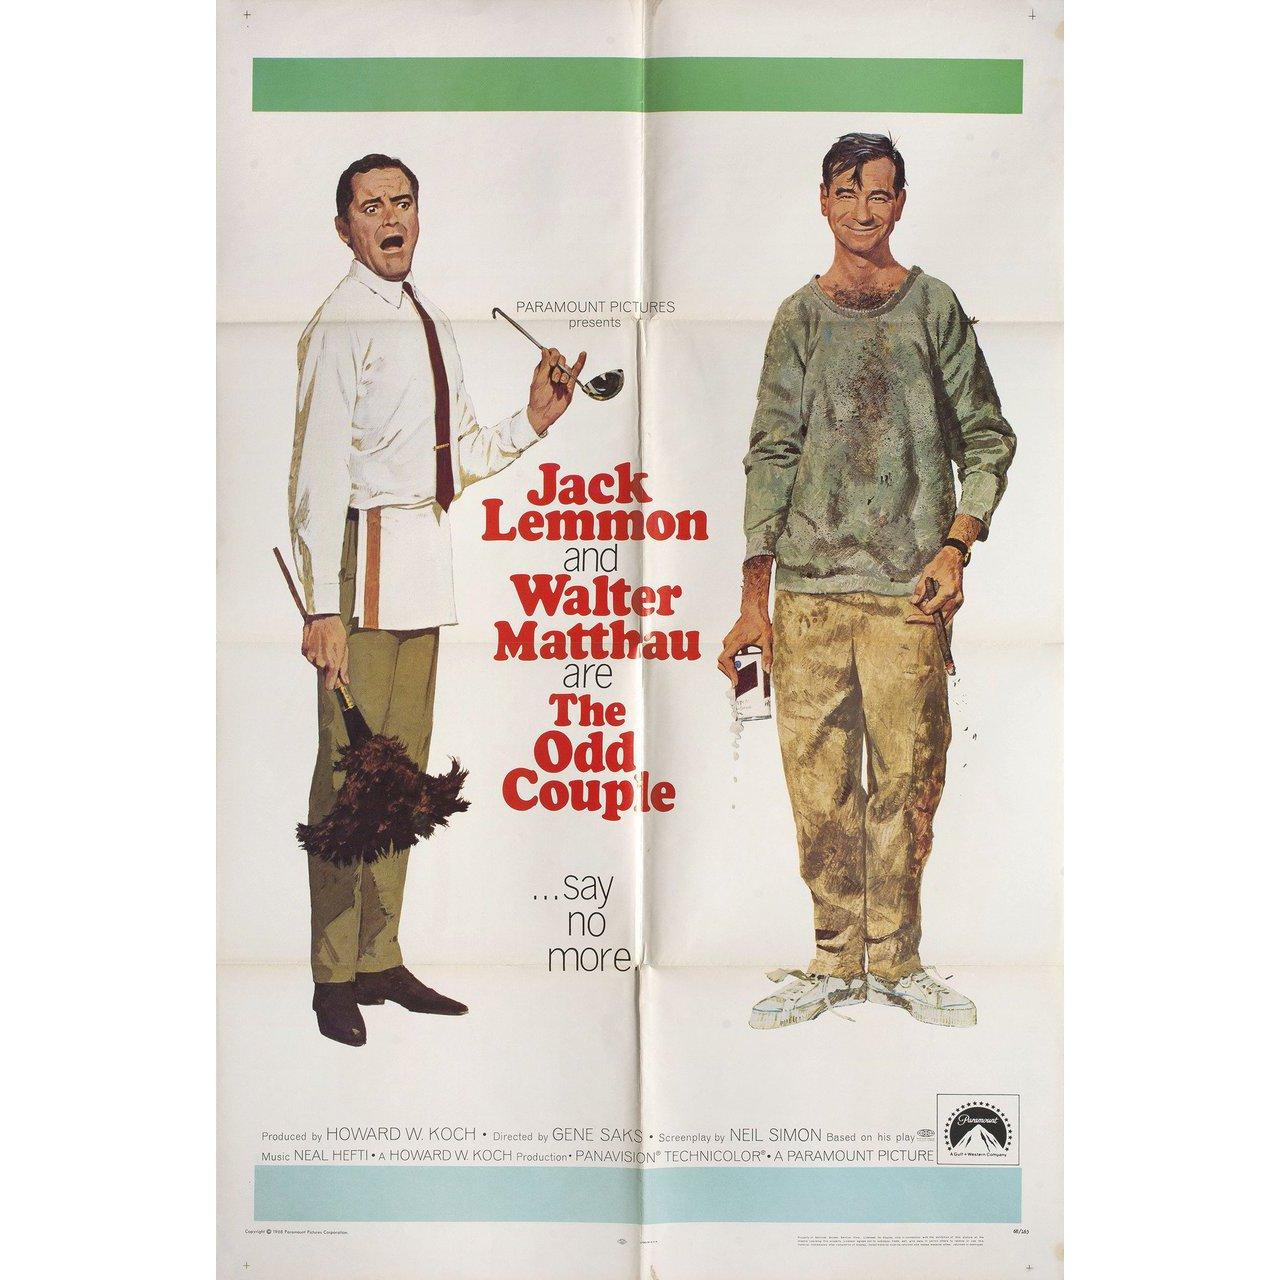 American The Odd Couple 1968 U.S. One Sheet Film Poster